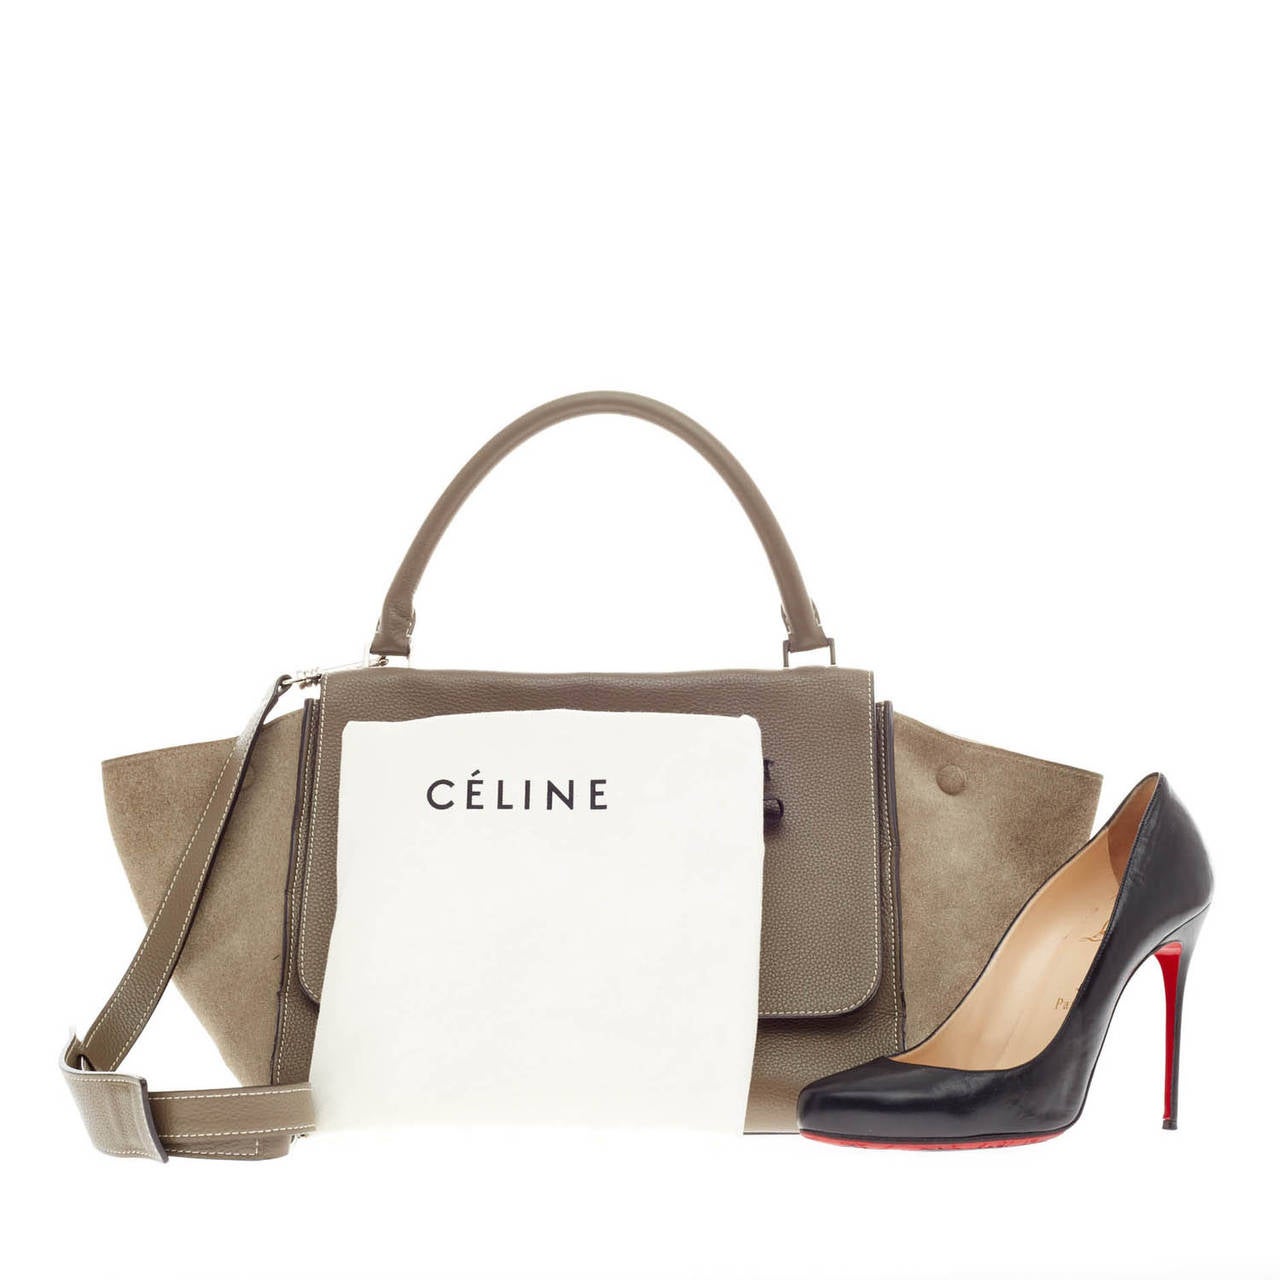 This authentic Celine Trapeze Suede in size Medium is a sleek and highly sought-after bag in a versatile neutral taupe palette. Crafted from sturdy pebbled leather with suede side wings, this popular minimalist satchel features a full frontal flap,